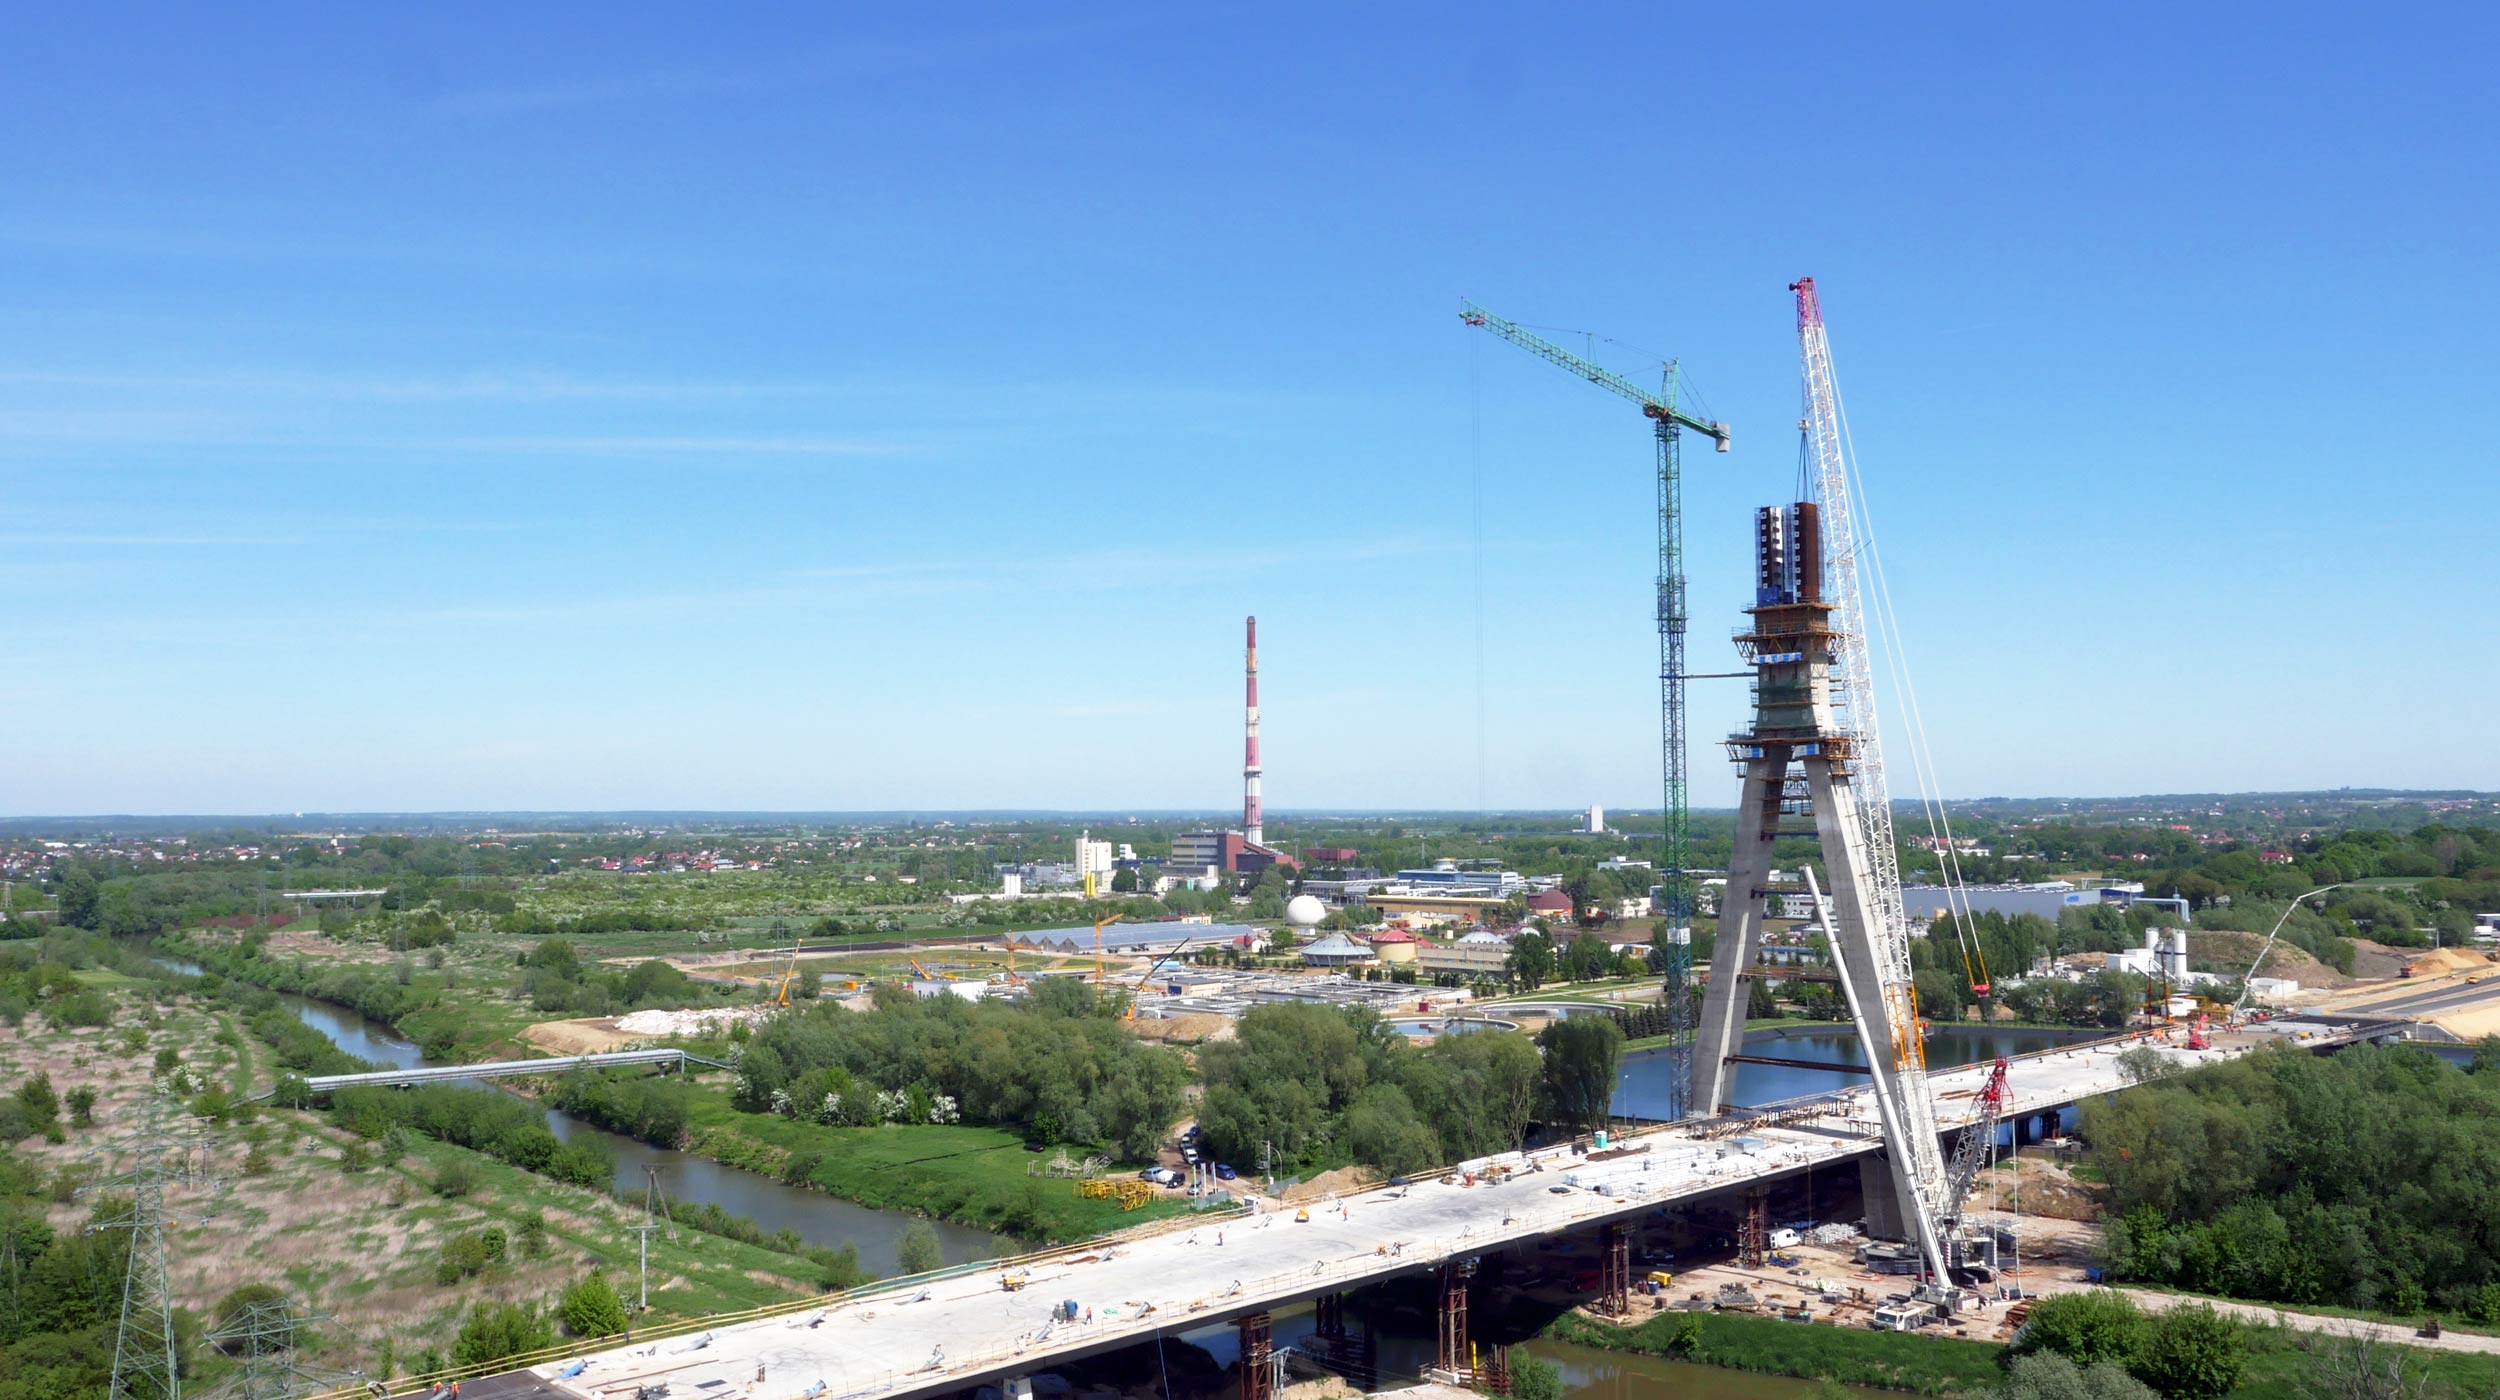 The unique element of the project is a reinforced-concrete pylon measuring 108.5 meters in height.